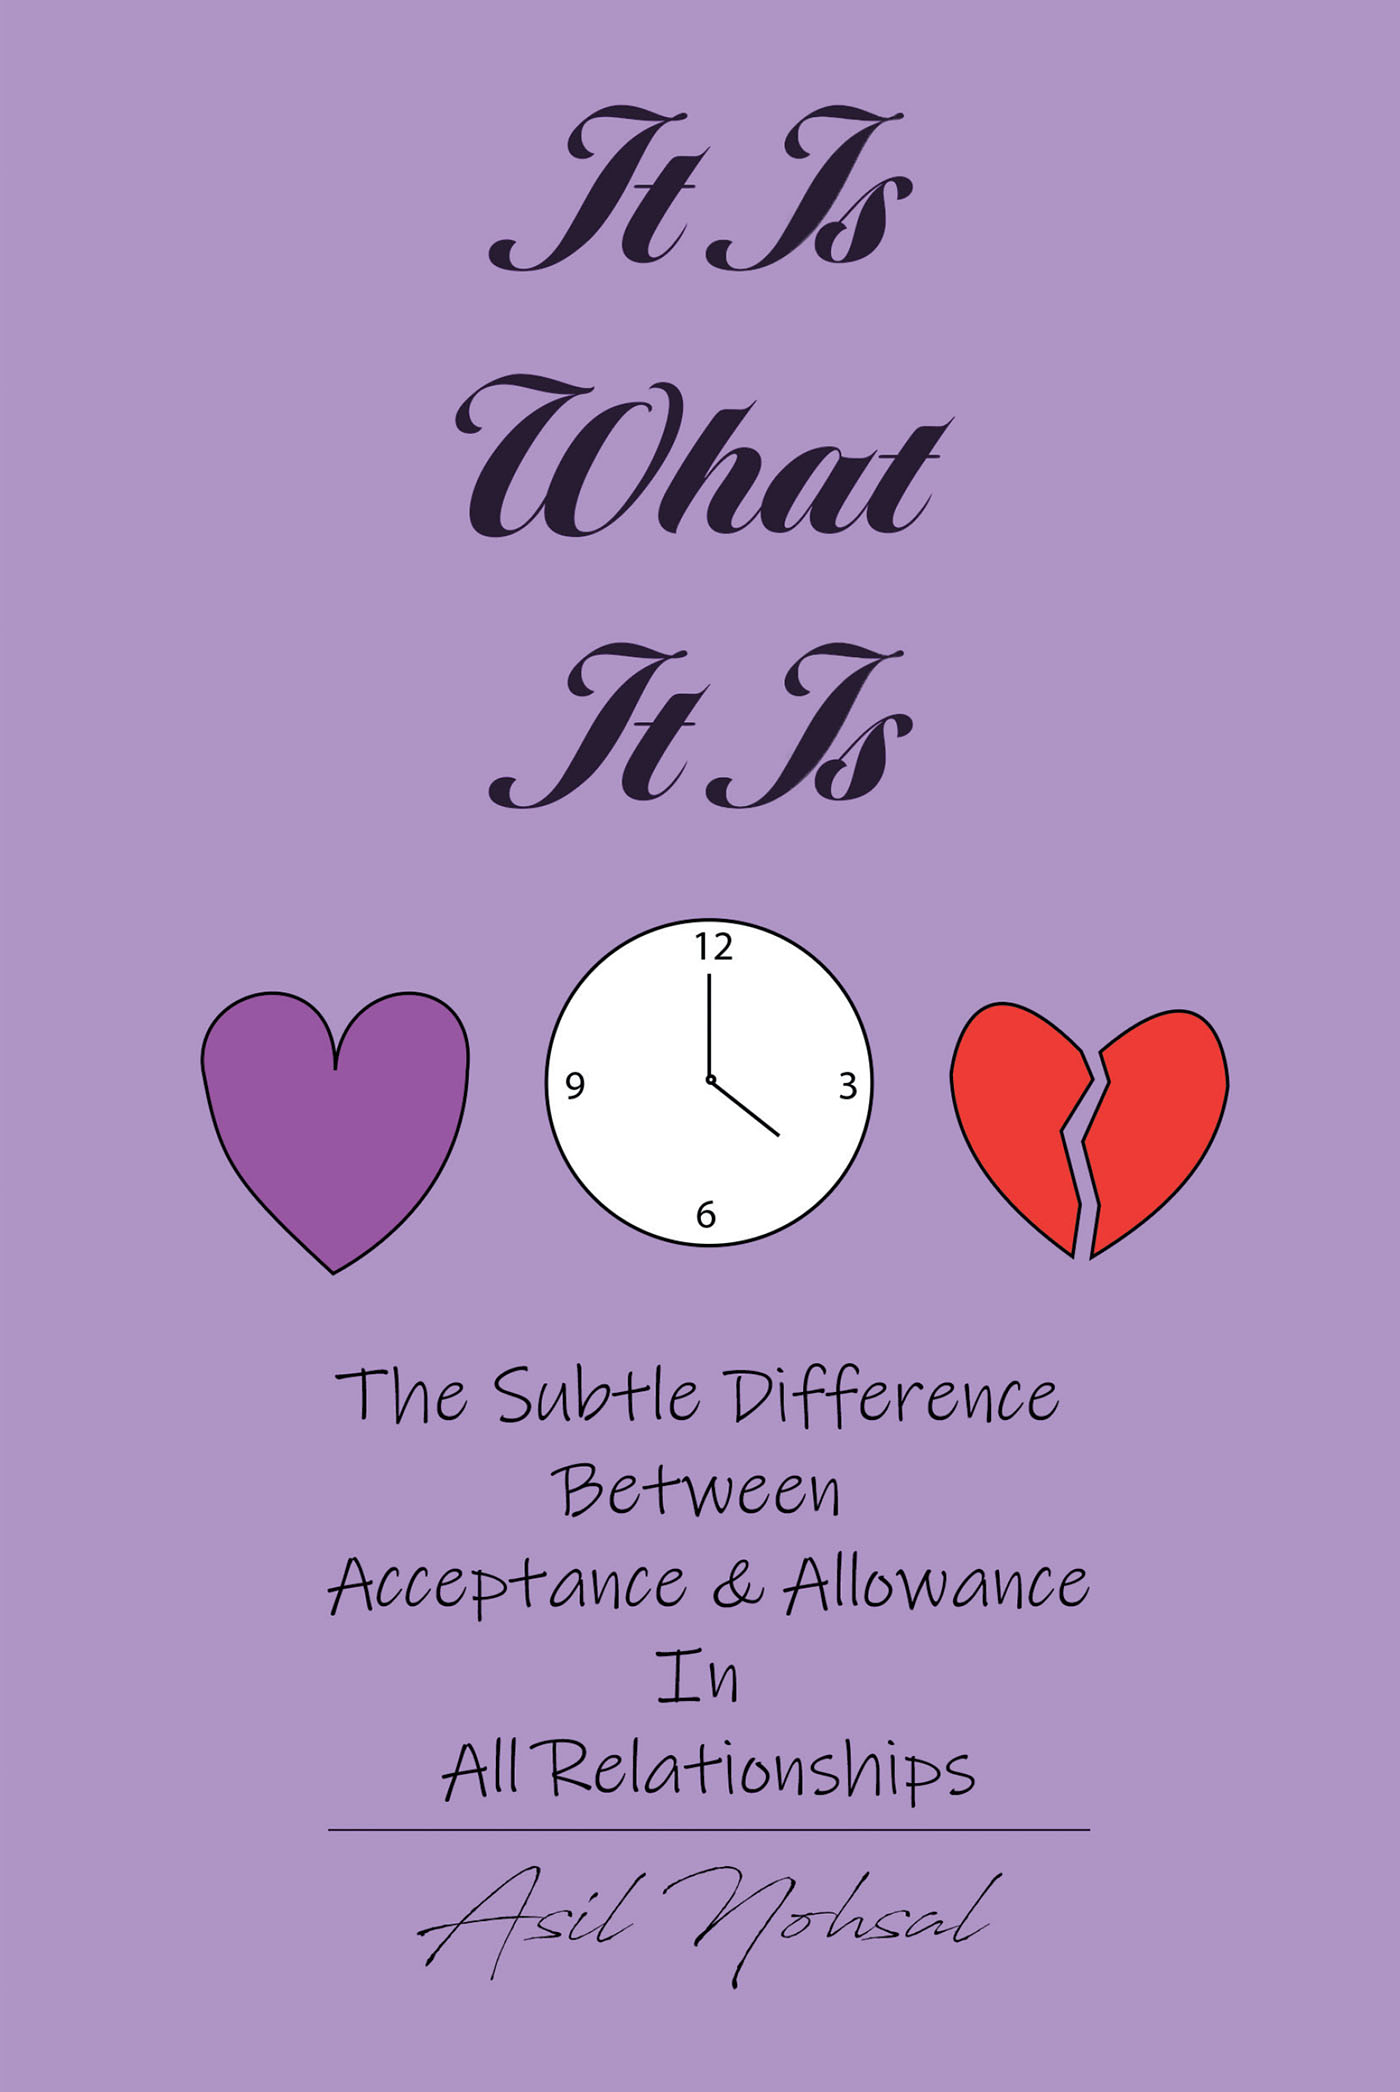 Author Asil Nohsal’s New Book, "It Is What It Is," is an Eye-Opening Exploration of the Subtle Differences Between Acceptance and Allowance in One’s Relationships